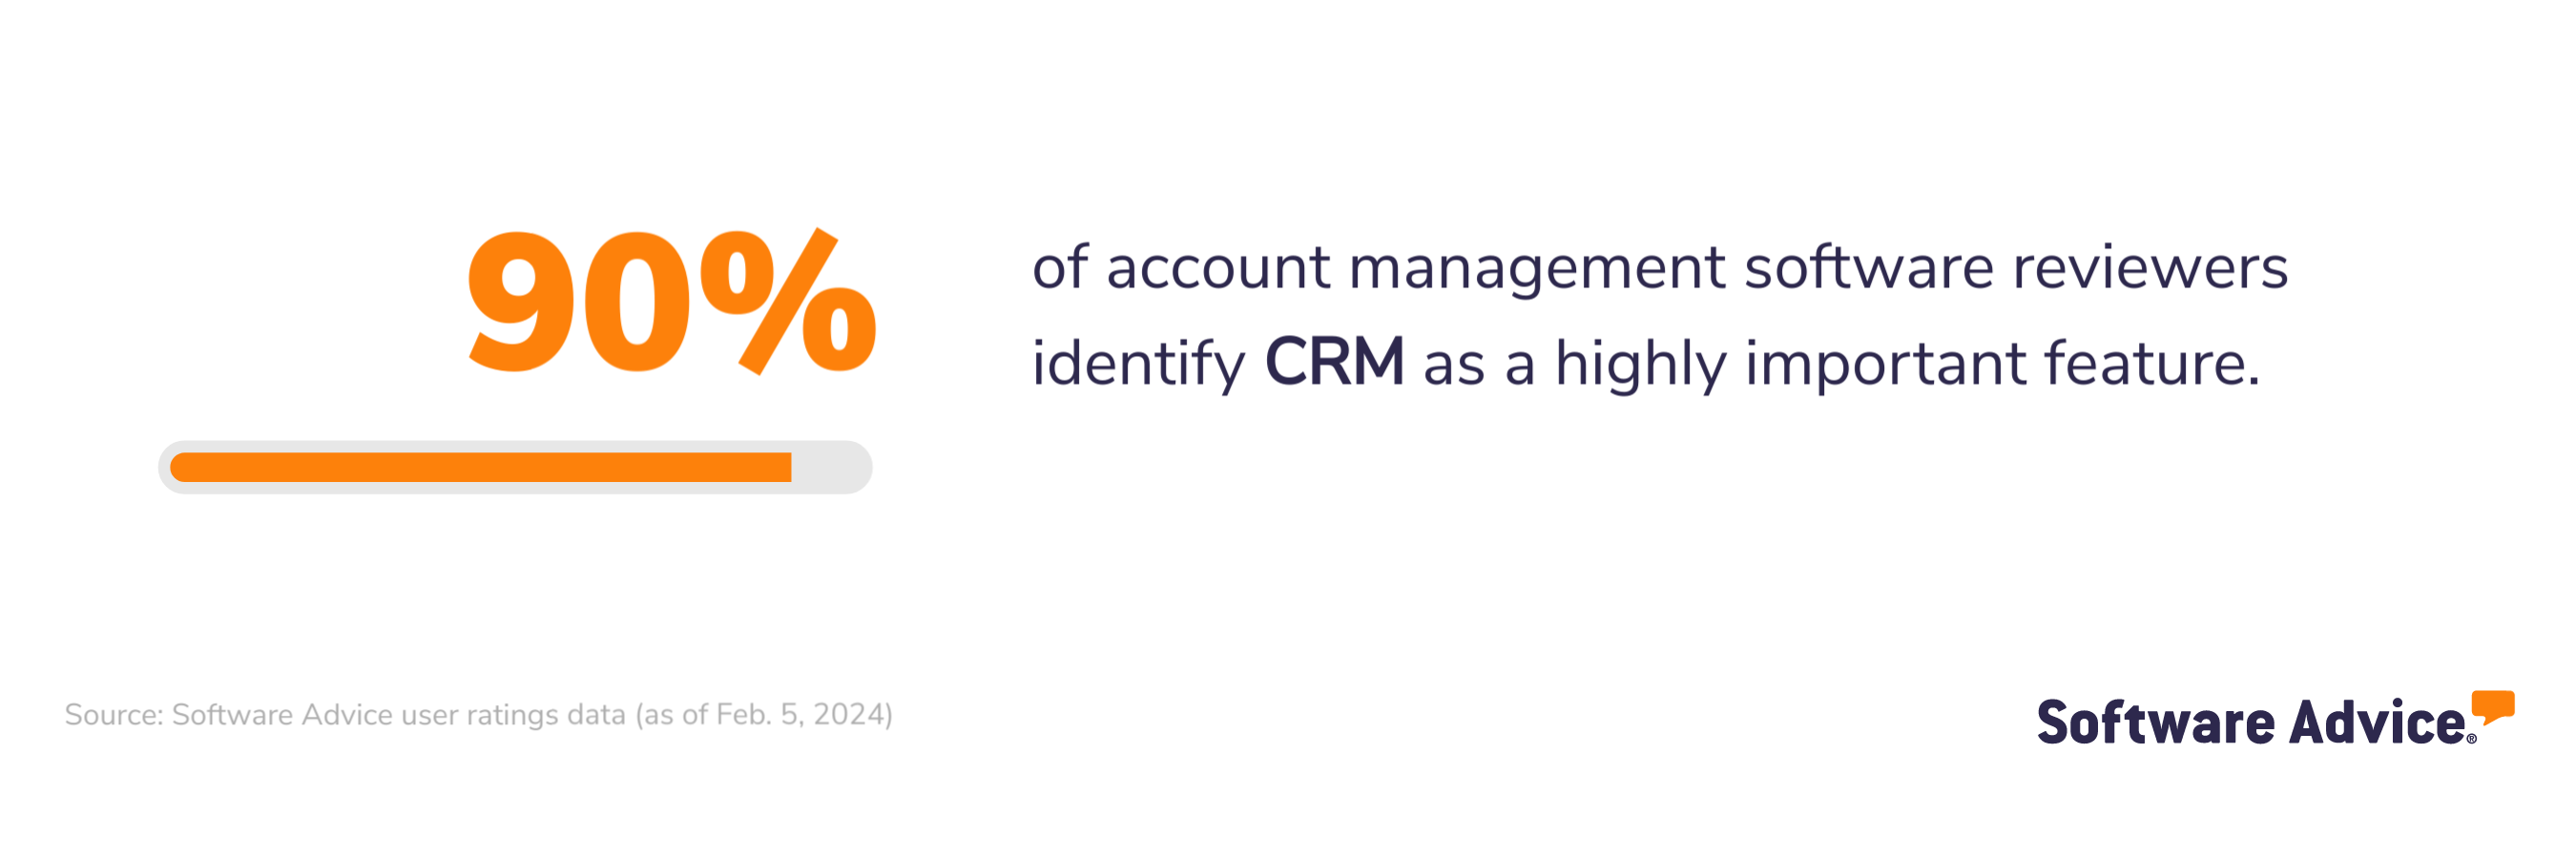 CRM feature of account management software